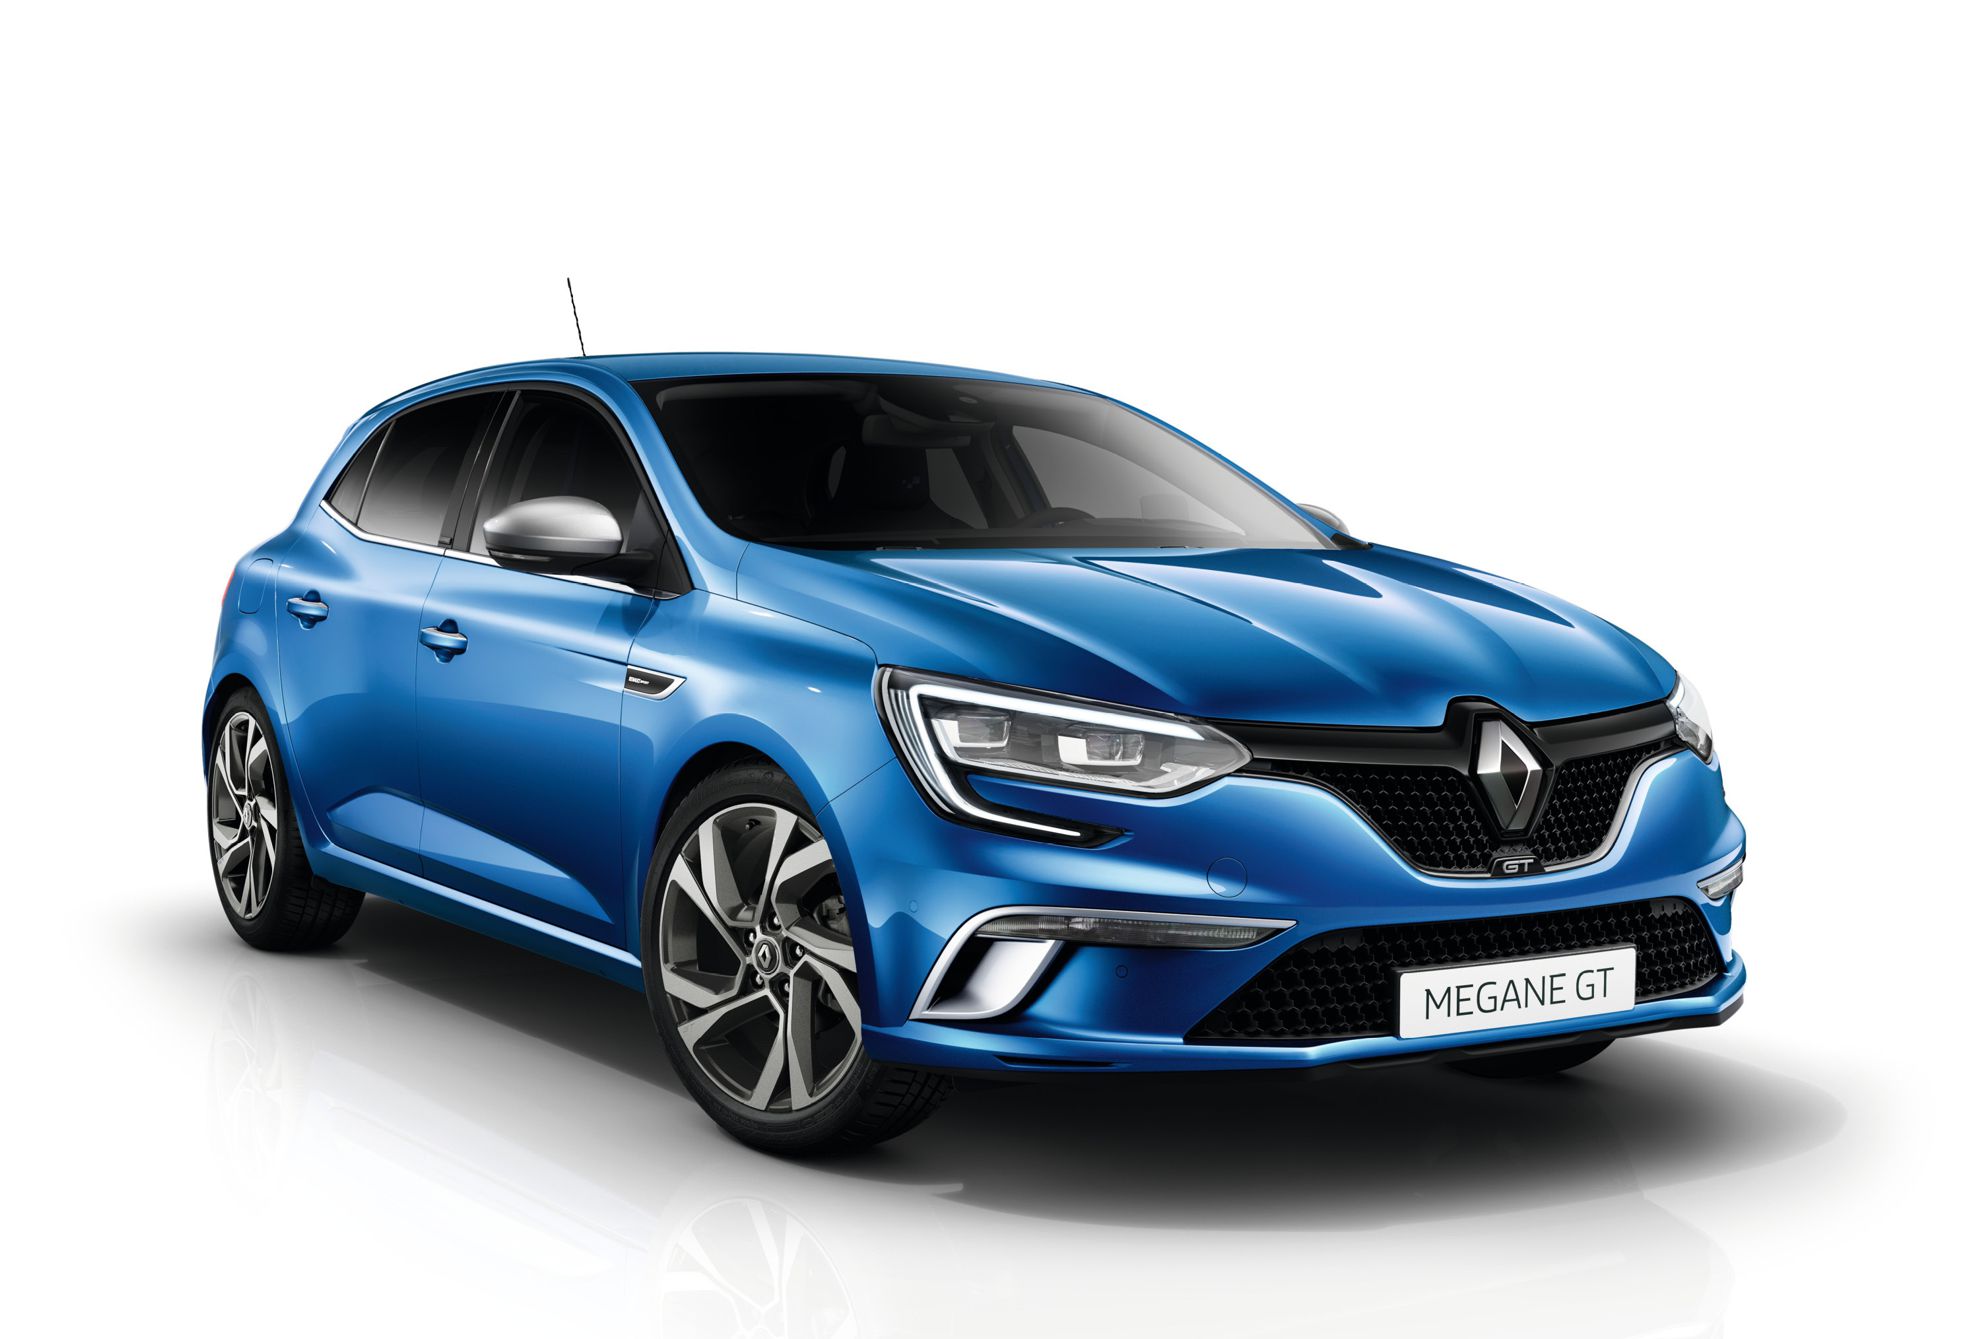 Renault reveals dynamically styled, high-tech new Mégane